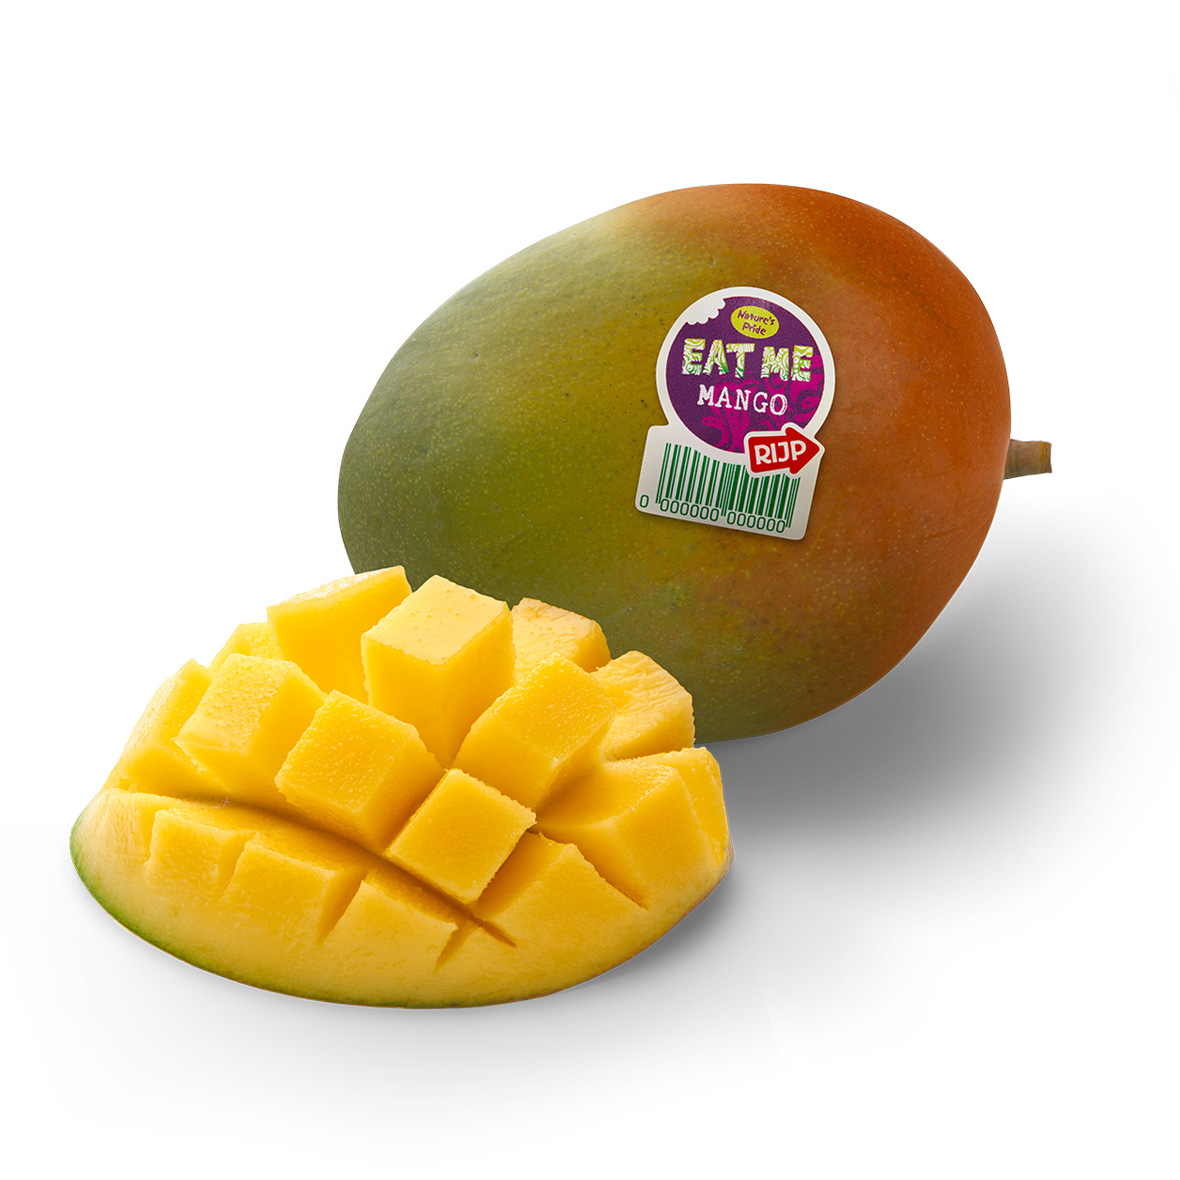 Ready-to-eat mangoes, on sale 12 months ...